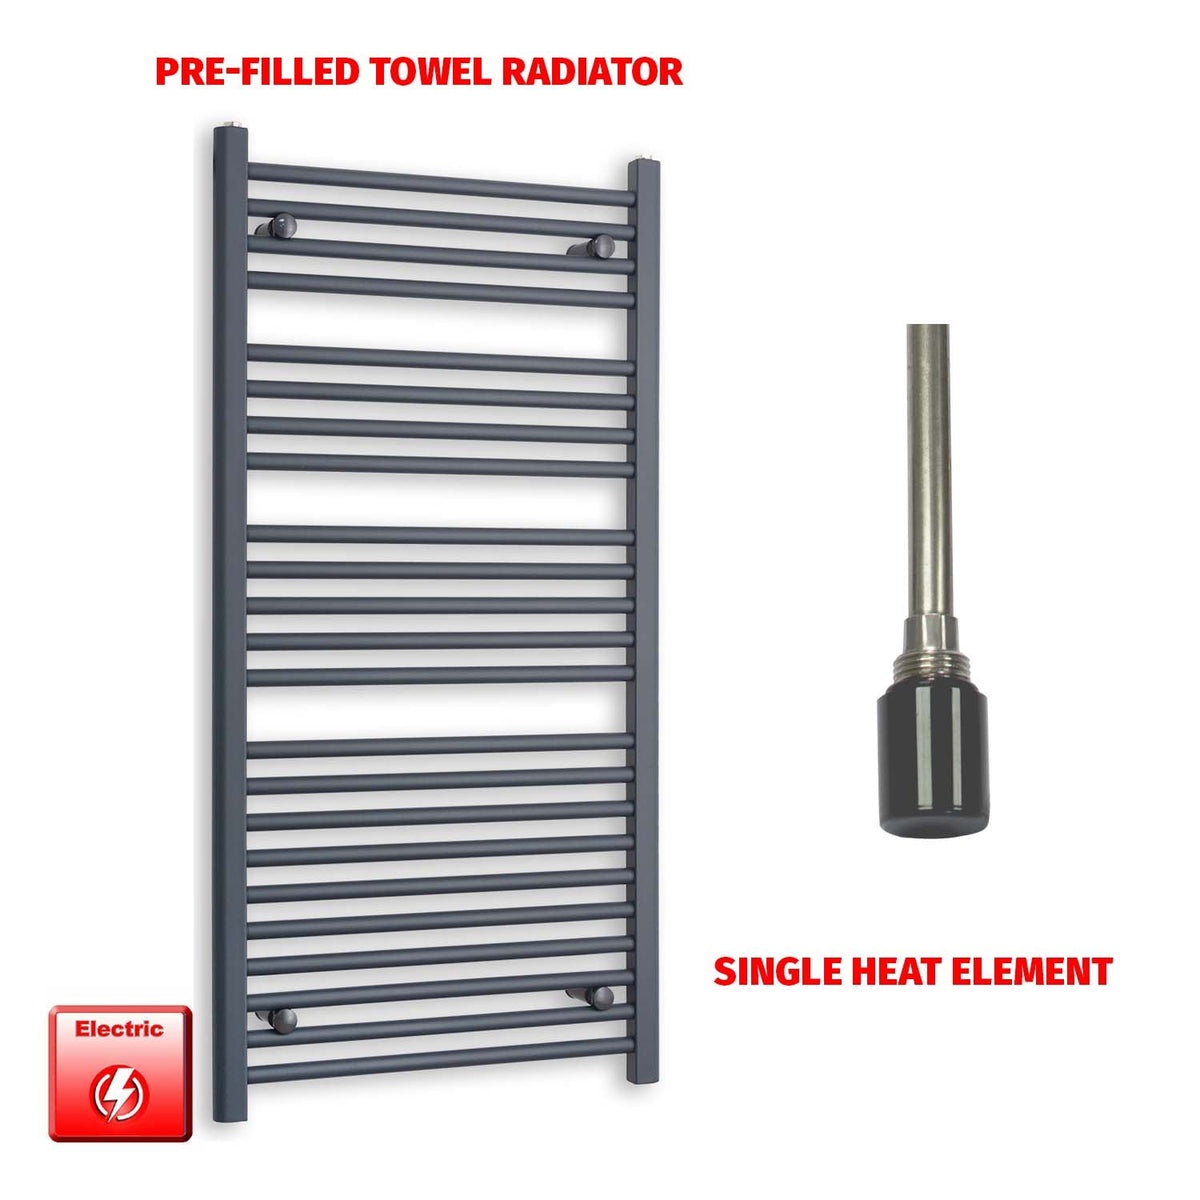 1200mm High 600mm Wide Flat Anthracite Pre-Filled Electric Heated Towel Rail Radiator HTR Single heat element no timer